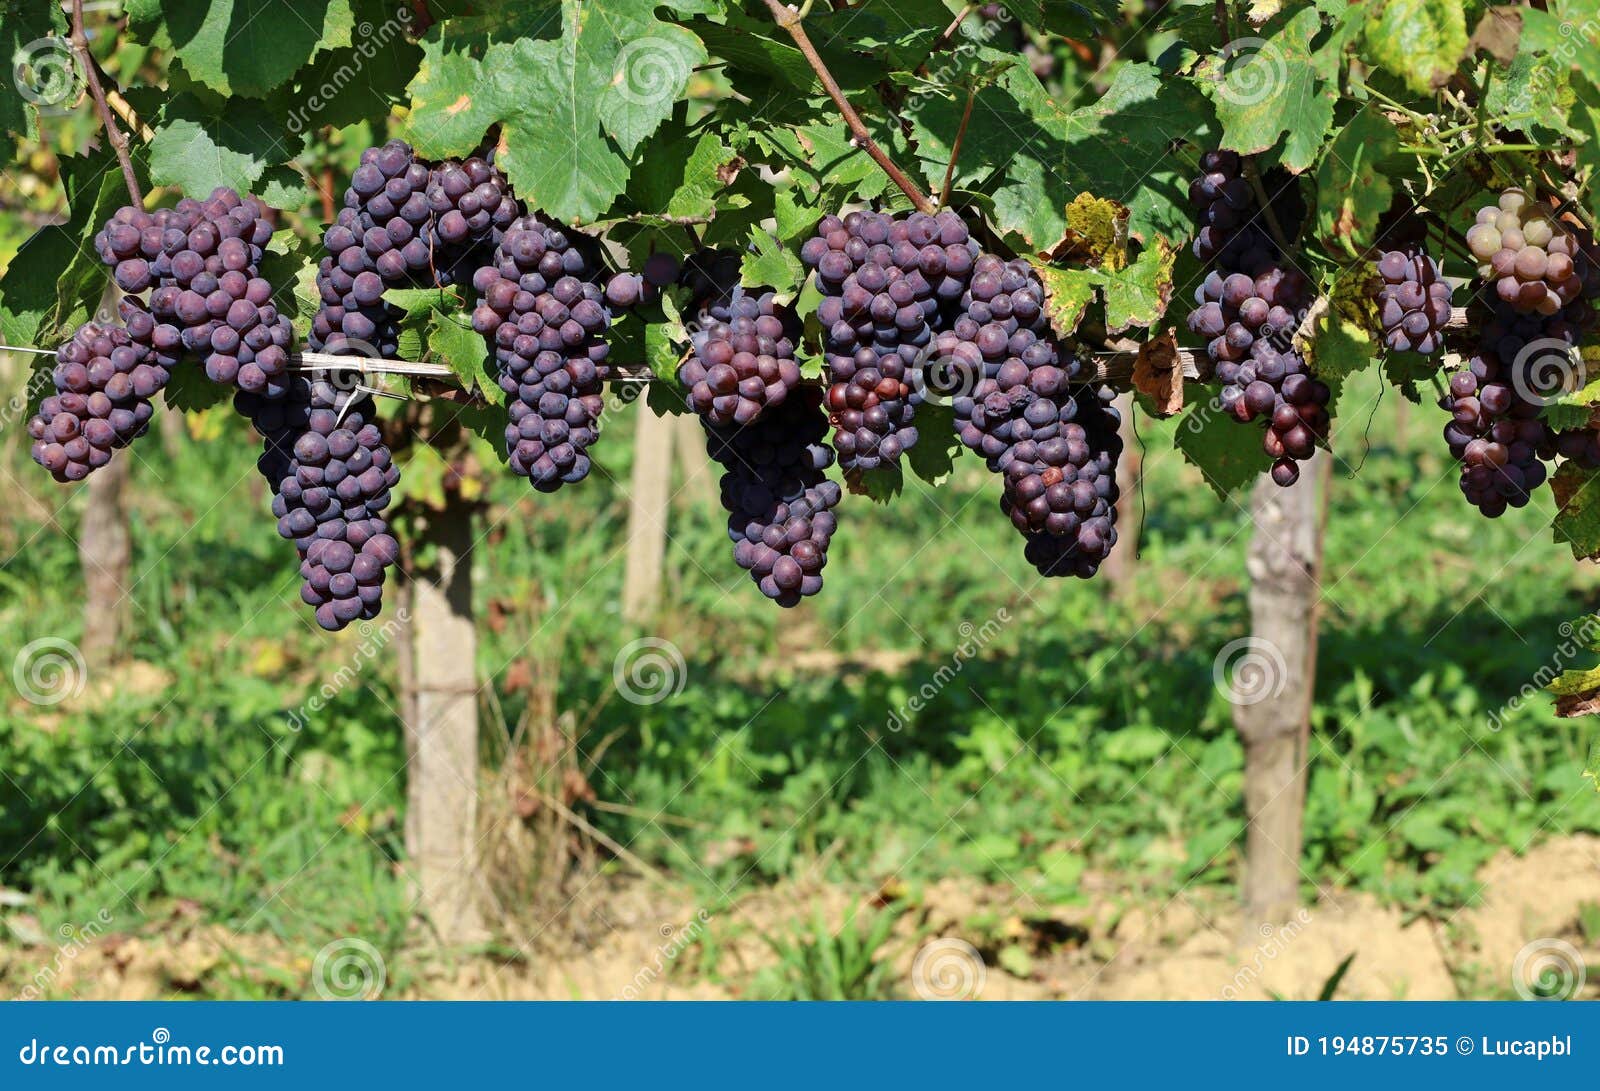 pinot gris grapes, blue brownish variety, hanging on vine